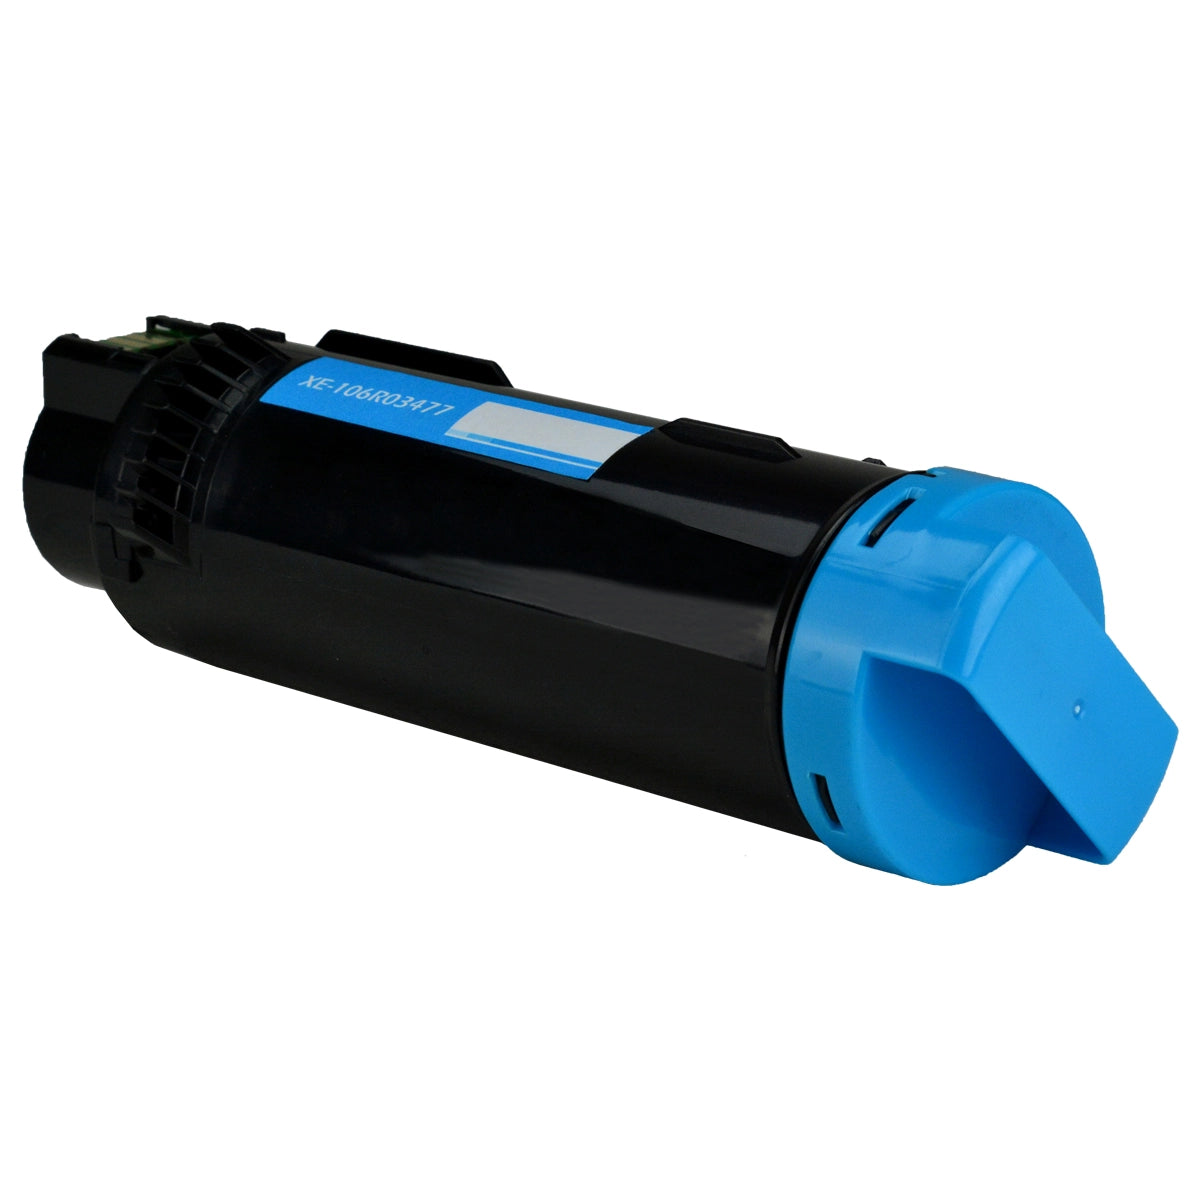 Xerox Phaser 6510/ Workcentre 6515 (106R03477) Cyan High Capacity Compatible Toner Cartridge